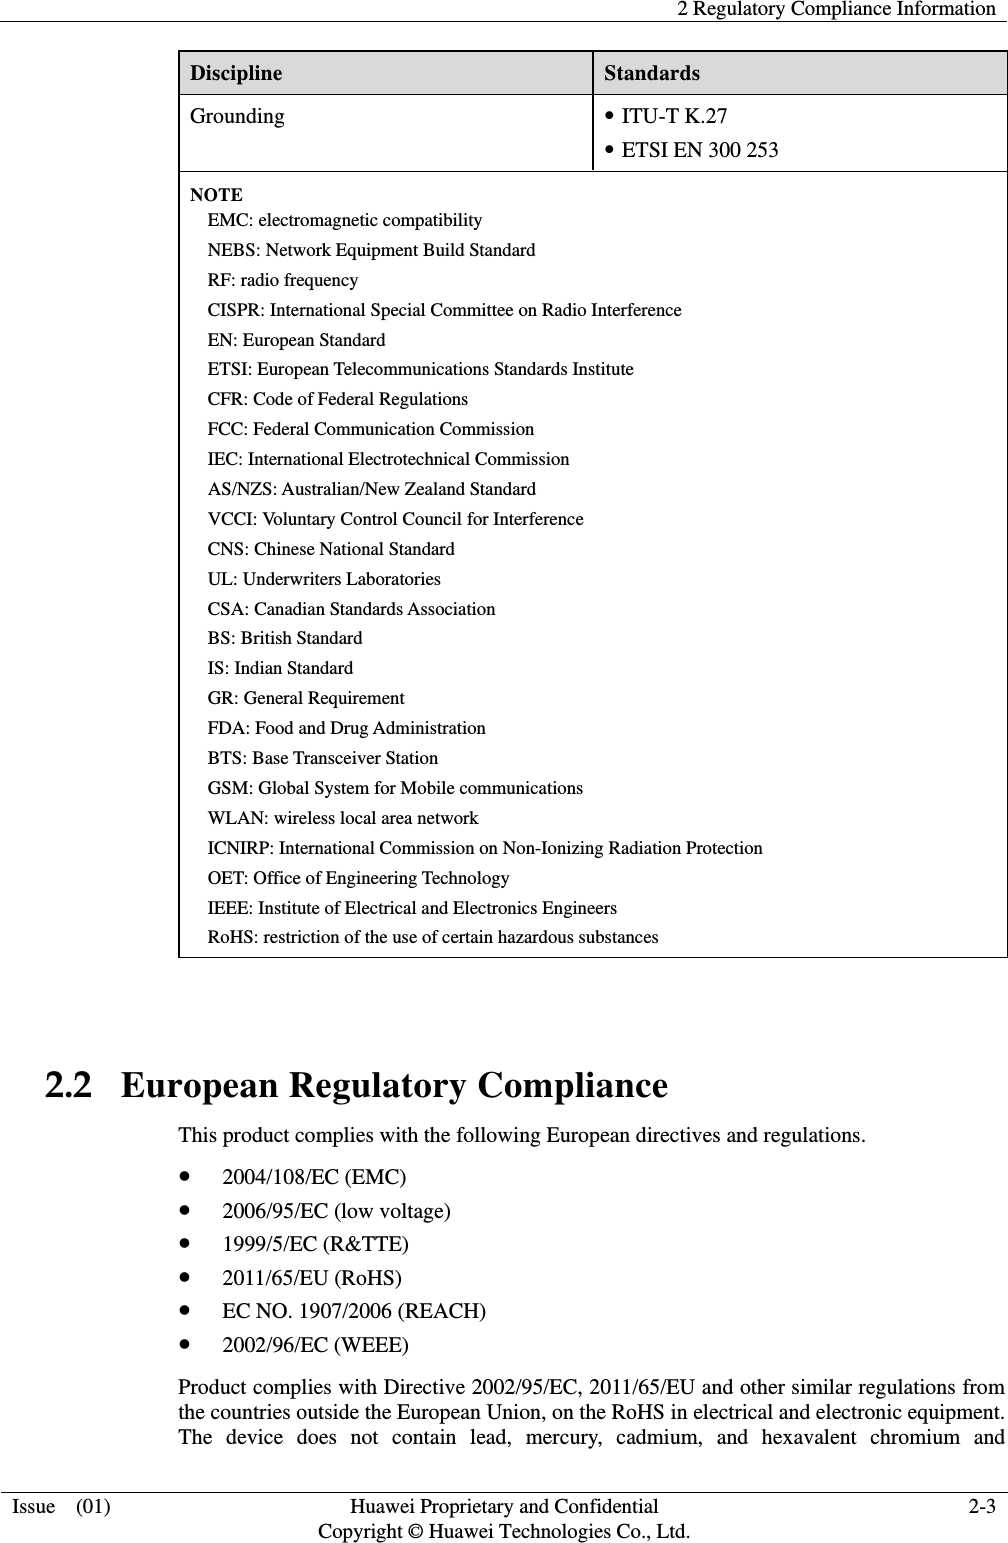    2 Regulatory Compliance Information  Issue  (01)  Huawei Proprietary and Confidential     Copyright © Huawei Technologies Co., Ltd. 2-3 Discipline  Standards Grounding  z ITU-T K.27 z ETSI EN 300 253 NOTE EMC: electromagnetic compatibility NEBS: Network Equipment Build Standard RF: radio frequency CISPR: International Special Committee on Radio Interference EN: European Standard ETSI: European Telecommunications Standards Institute CFR: Code of Federal Regulations FCC: Federal Communication Commission IEC: International Electrotechnical Commission AS/NZS: Australian/New Zealand Standard VCCI: Voluntary Control Council for Interference CNS: Chinese National Standard UL: Underwriters Laboratories CSA: Canadian Standards Association BS: British Standard IS: Indian Standard GR: General Requirement FDA: Food and Drug Administration BTS: Base Transceiver Station GSM: Global System for Mobile communications WLAN: wireless local area network ICNIRP: International Commission on Non-Ionizing Radiation Protection OET: Office of Engineering Technology IEEE: Institute of Electrical and Electronics Engineers RoHS: restriction of the use of certain hazardous substances  2.2   European Regulatory Compliance This product complies with the following European directives and regulations. z 2004/108/EC (EMC) z 2006/95/EC (low voltage) z 1999/5/EC (R&amp;TTE) z 2011/65/EU (RoHS) z EC NO. 1907/2006 (REACH) z 2002/96/EC (WEEE) Product complies with Directive 2002/95/EC, 2011/65/EU and other similar regulations from the countries outside the European Union, on the RoHS in electrical and electronic equipment. The device does not contain lead, mercury, cadmium, and hexavalent chromium and 